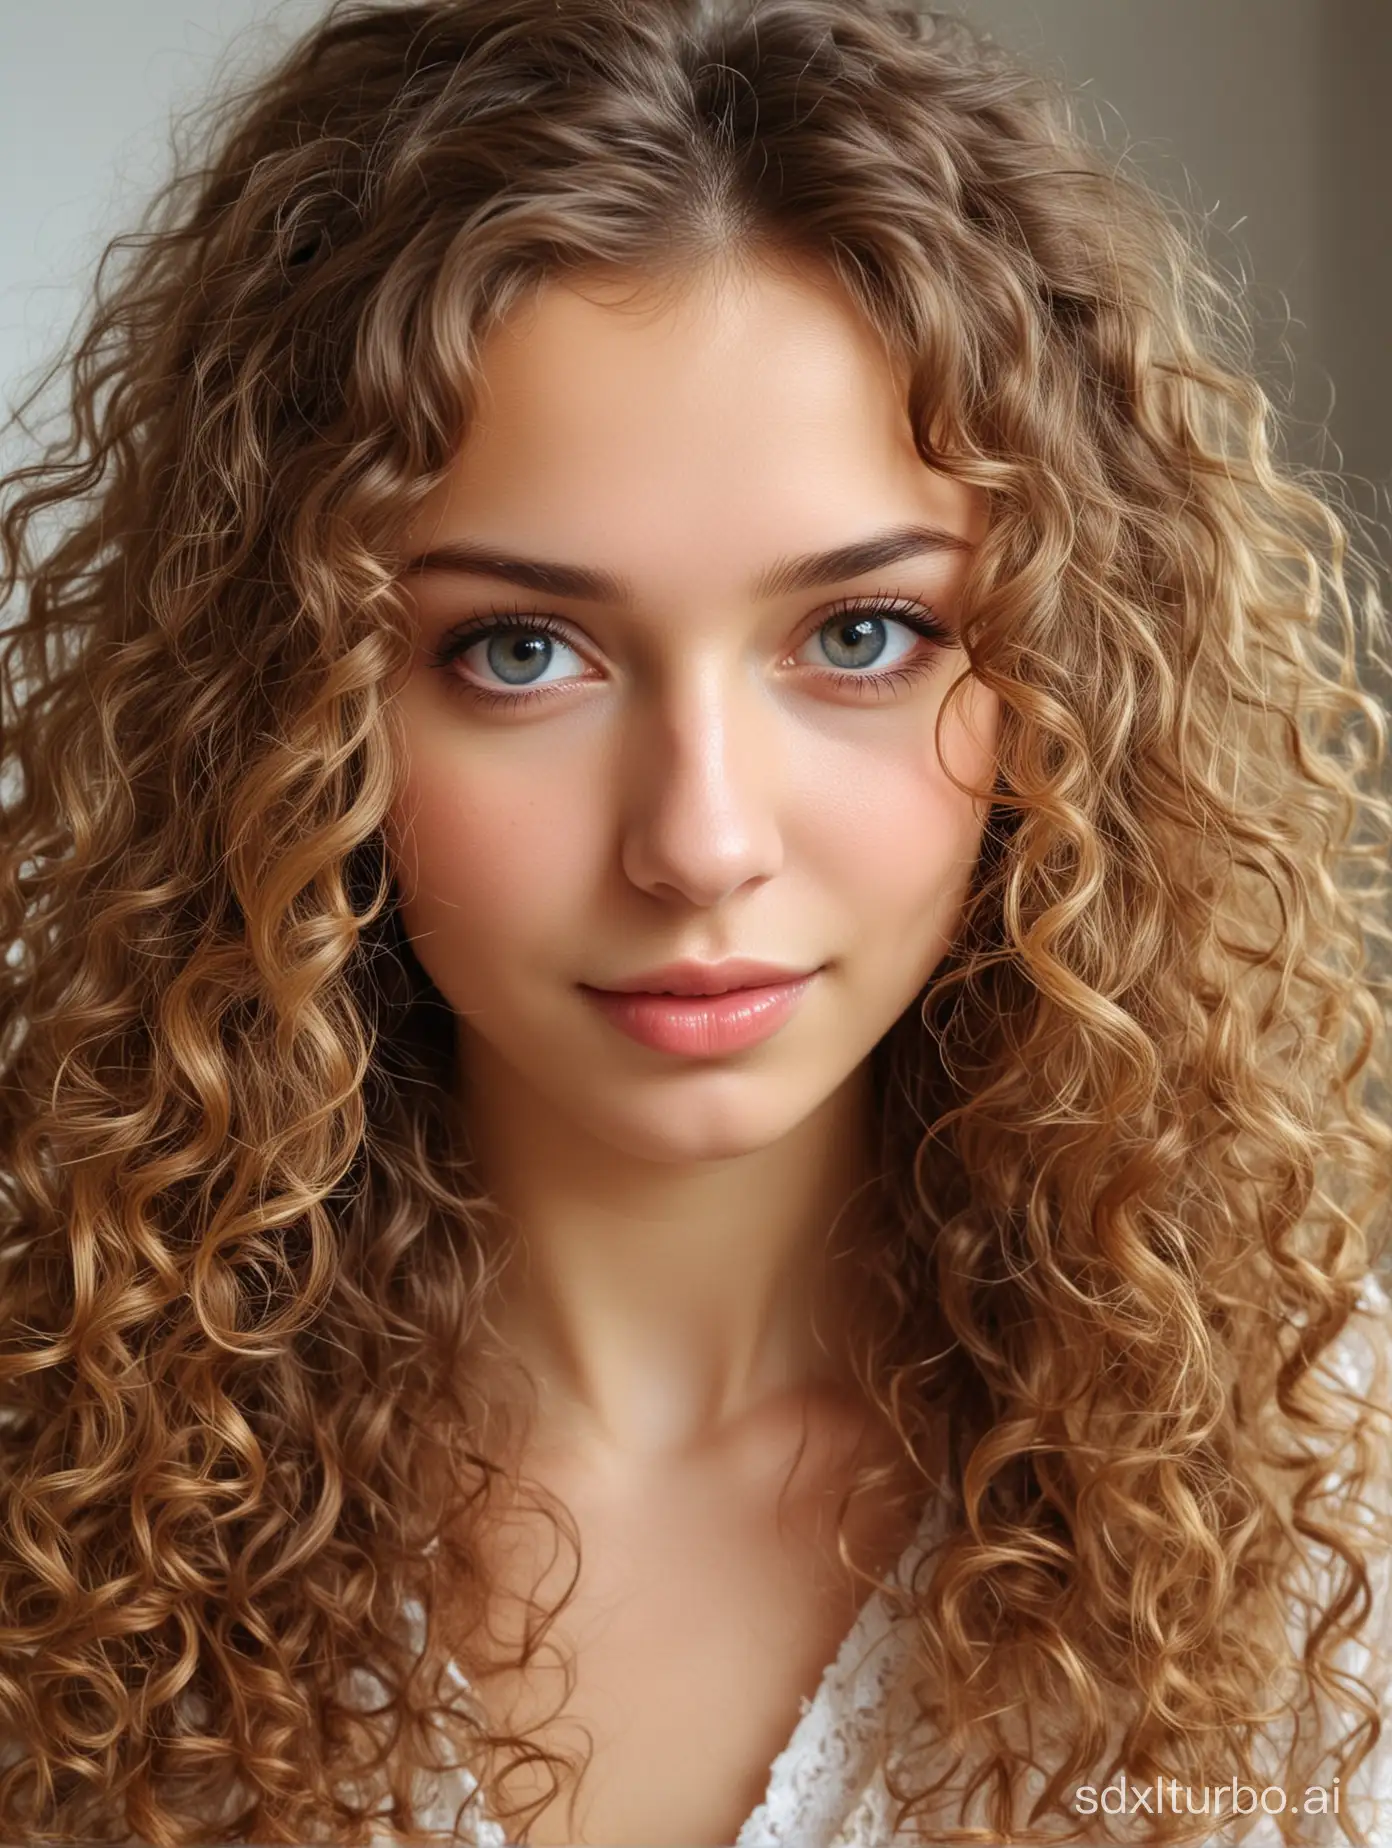 Elegant-Russian-Girl-with-Long-Curly-Hair-and-Enchanting-Eyes